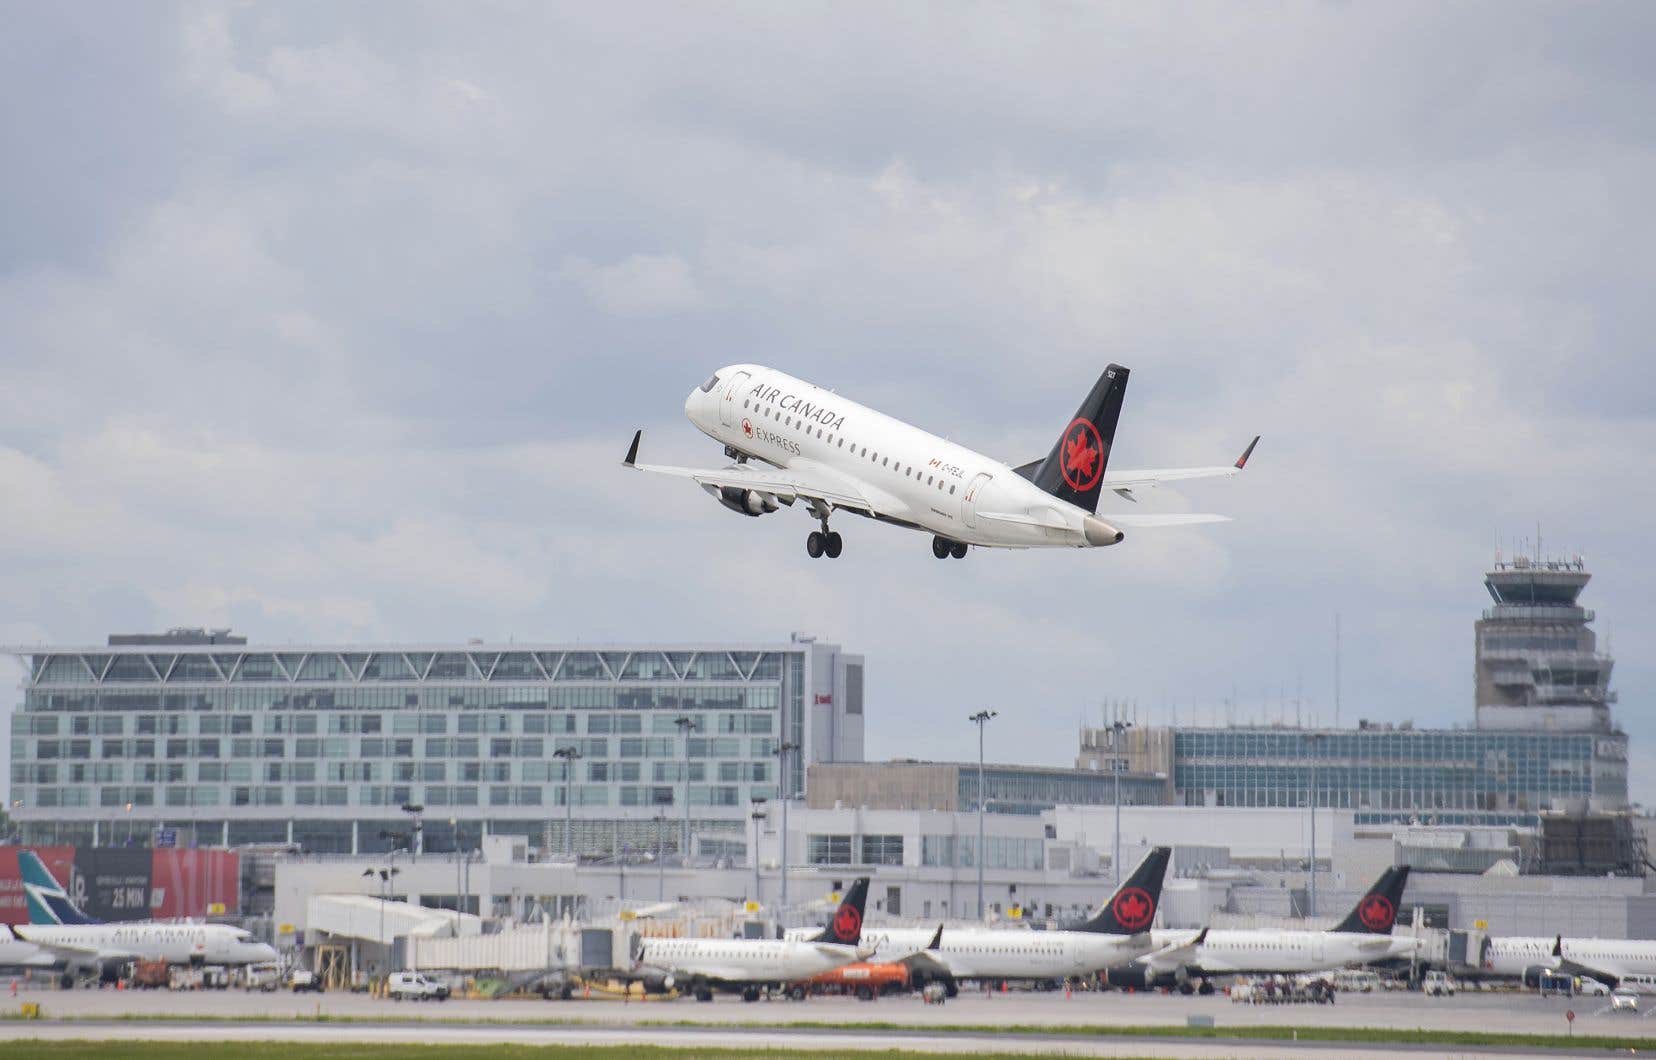 Air Canada and Pearson remain champions of delayed flights

